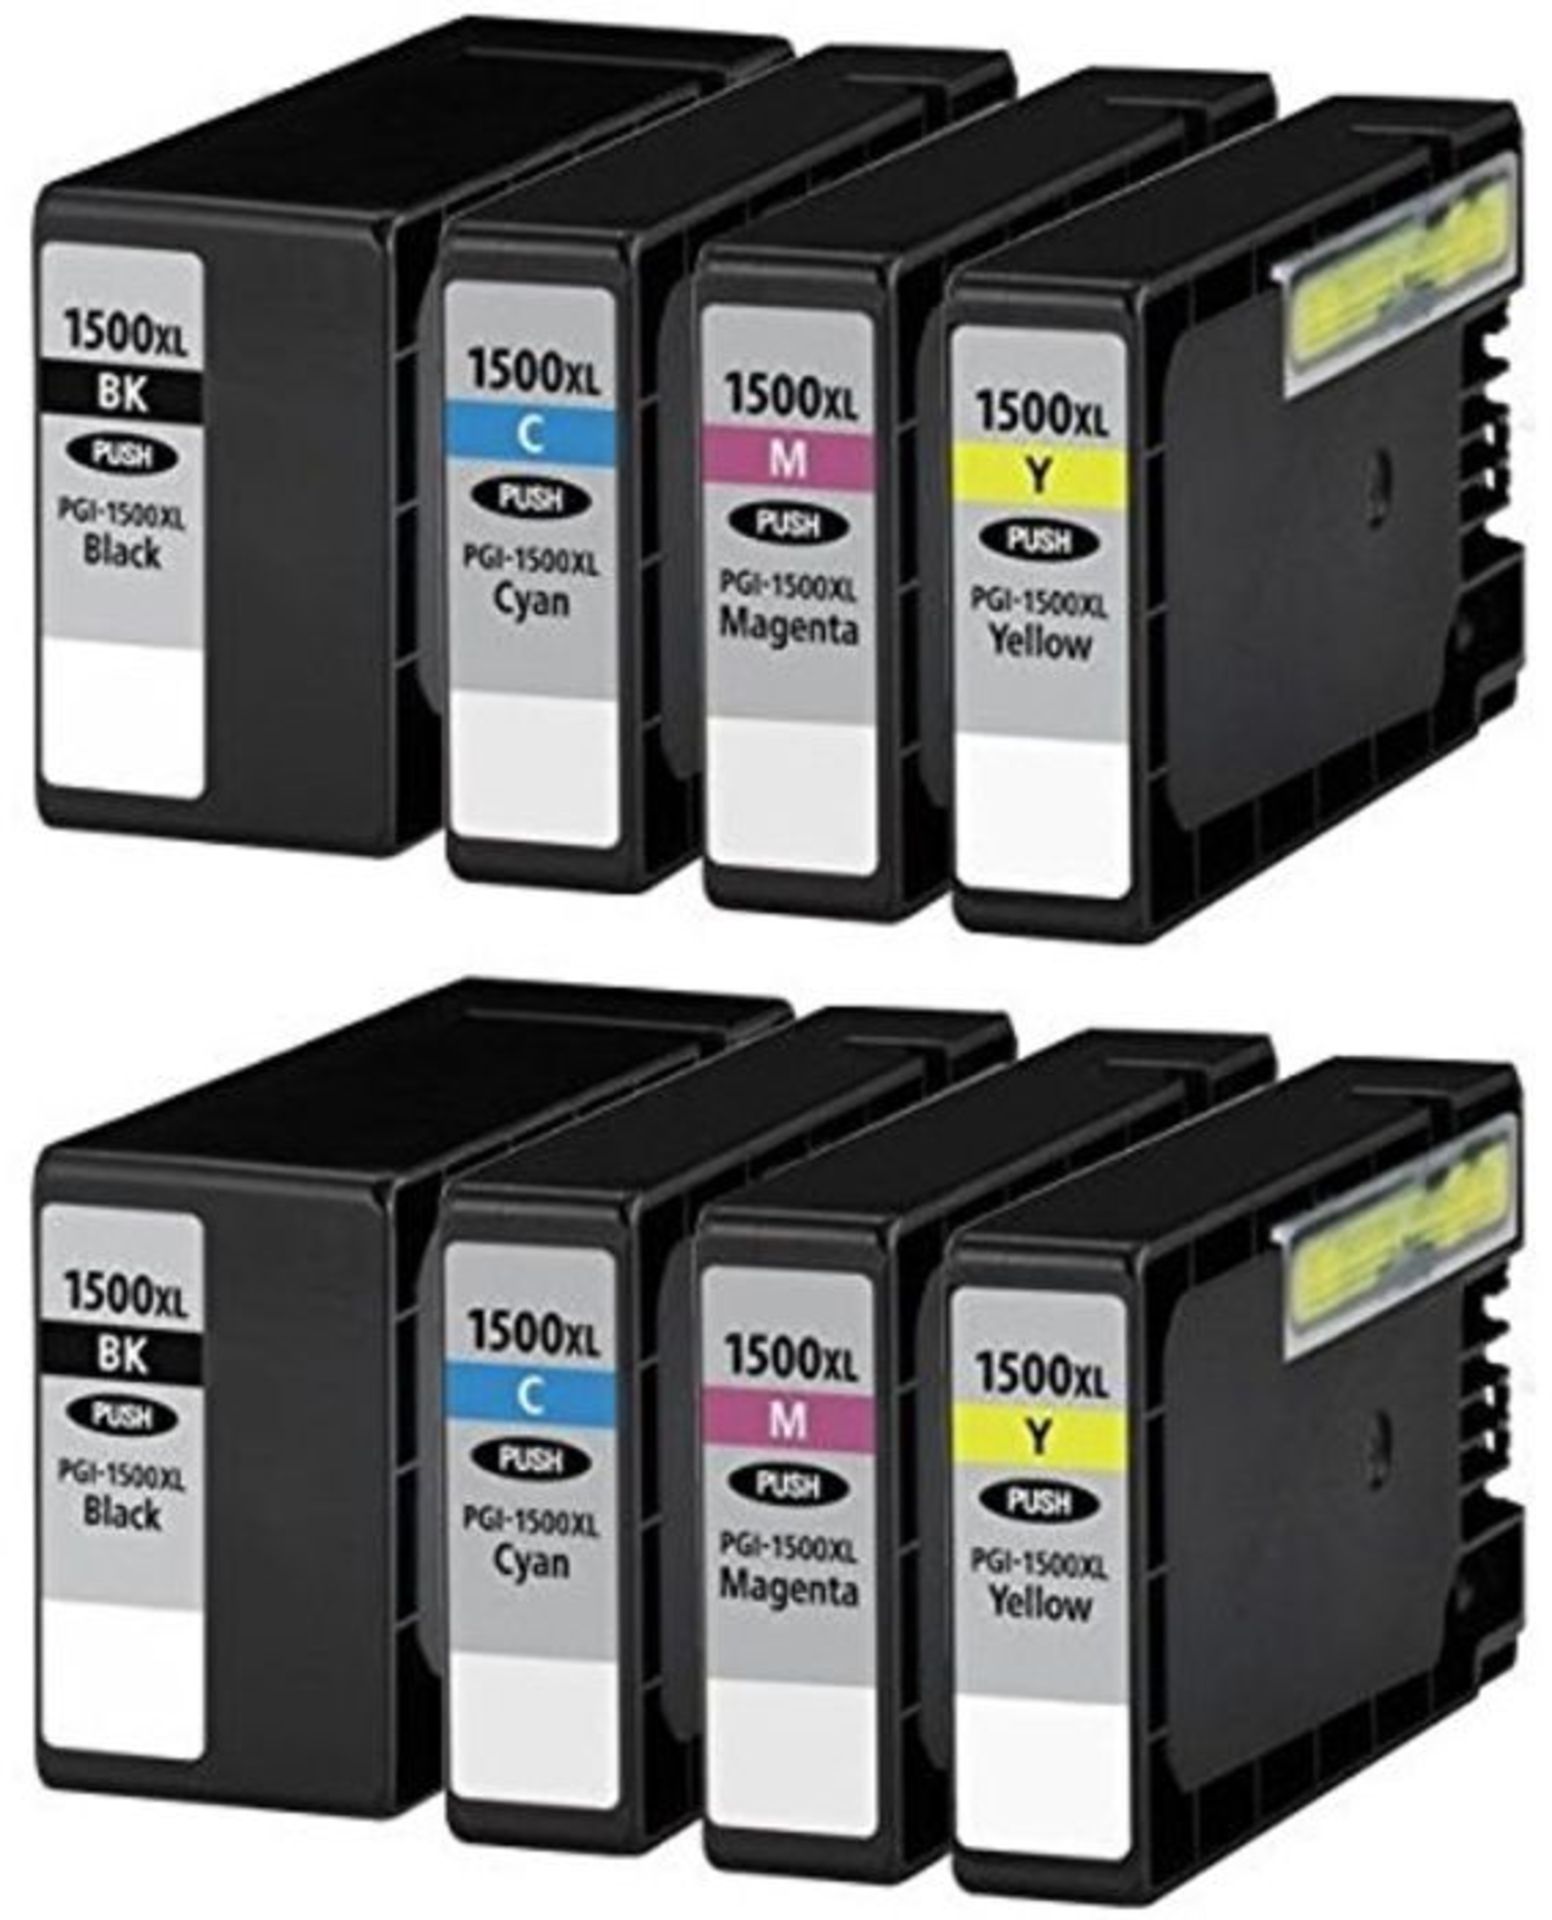 8 (2 SETS) Compatible Printer Ink Cartridges for Canon Maxify MB2000 Series, MB2050, M